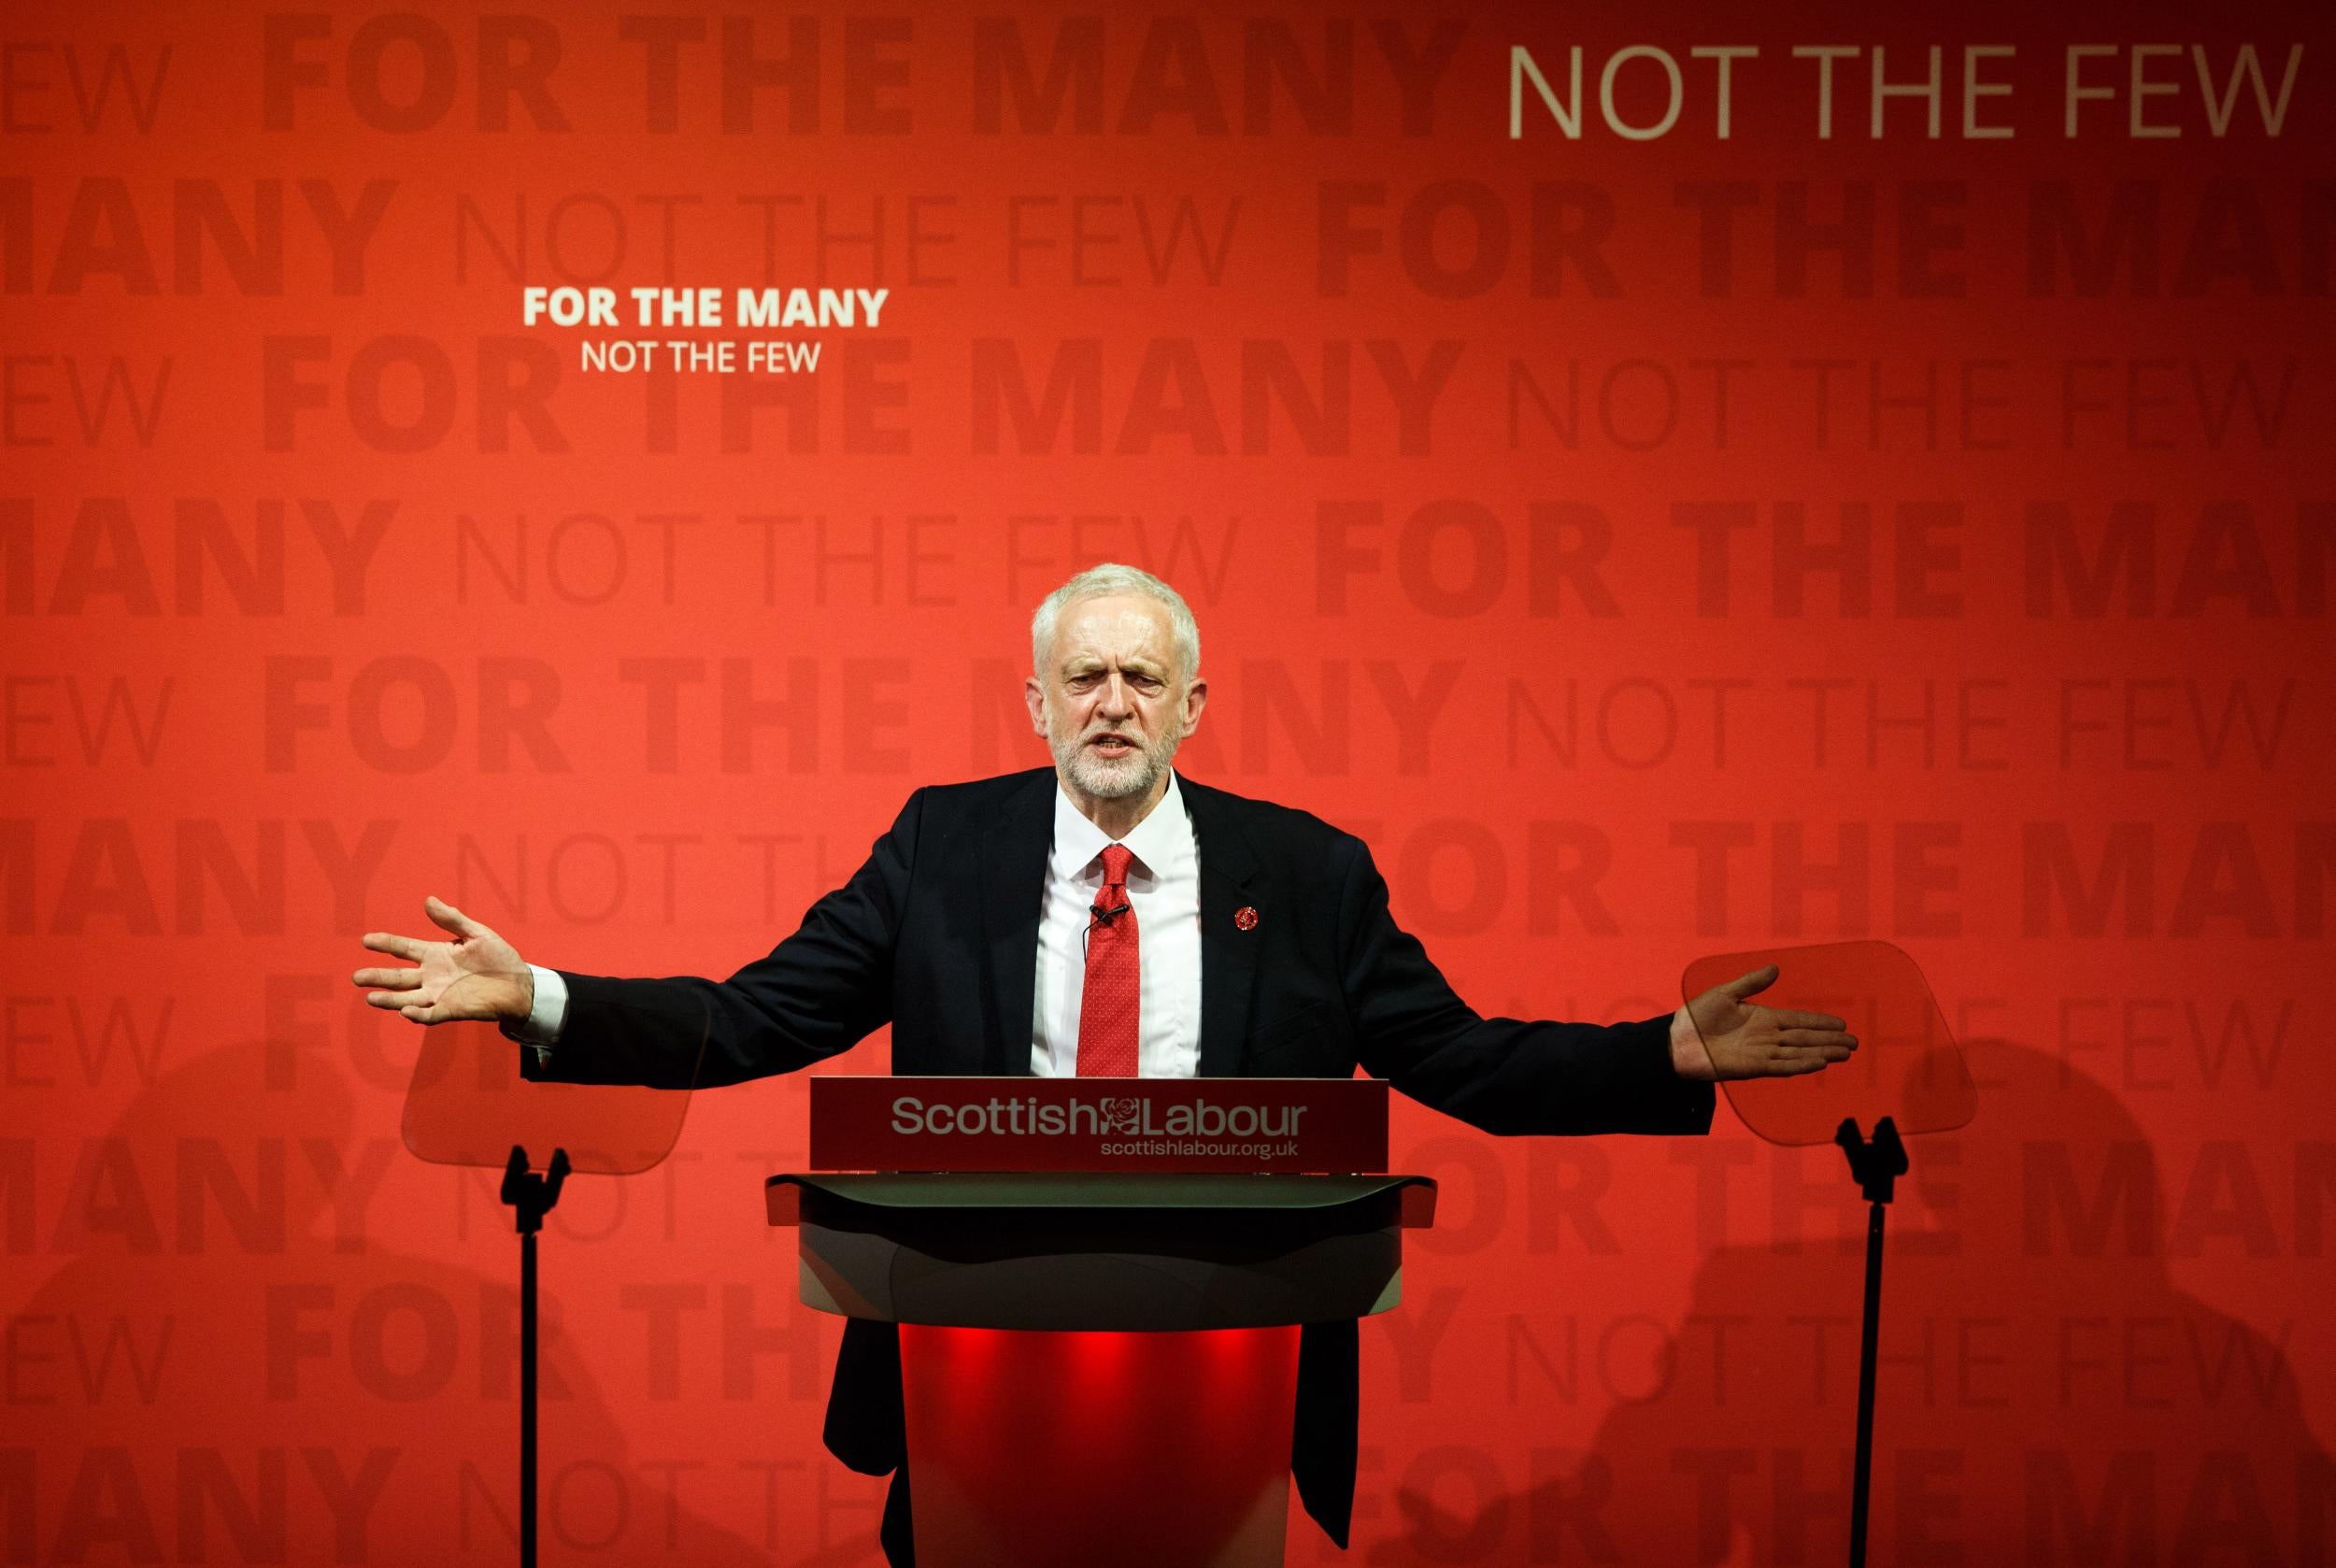 If Jeremy Corbyn becomes Prime Minister next week, he has promised to nationalise rail and energy companies and abolish tuition fees